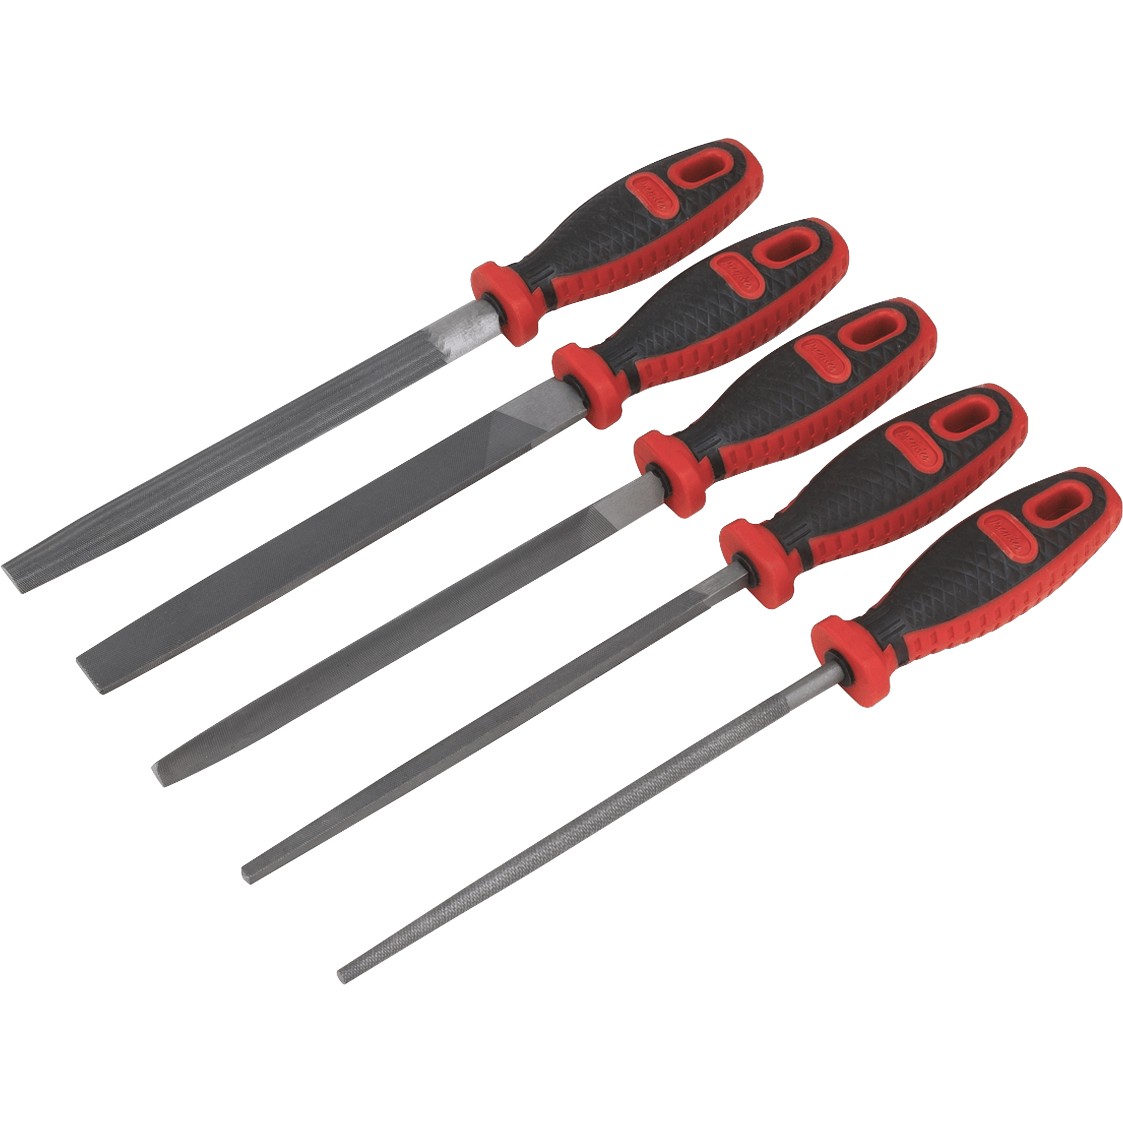 Sealey 5 Piece Smooth Cut Engineers File Set